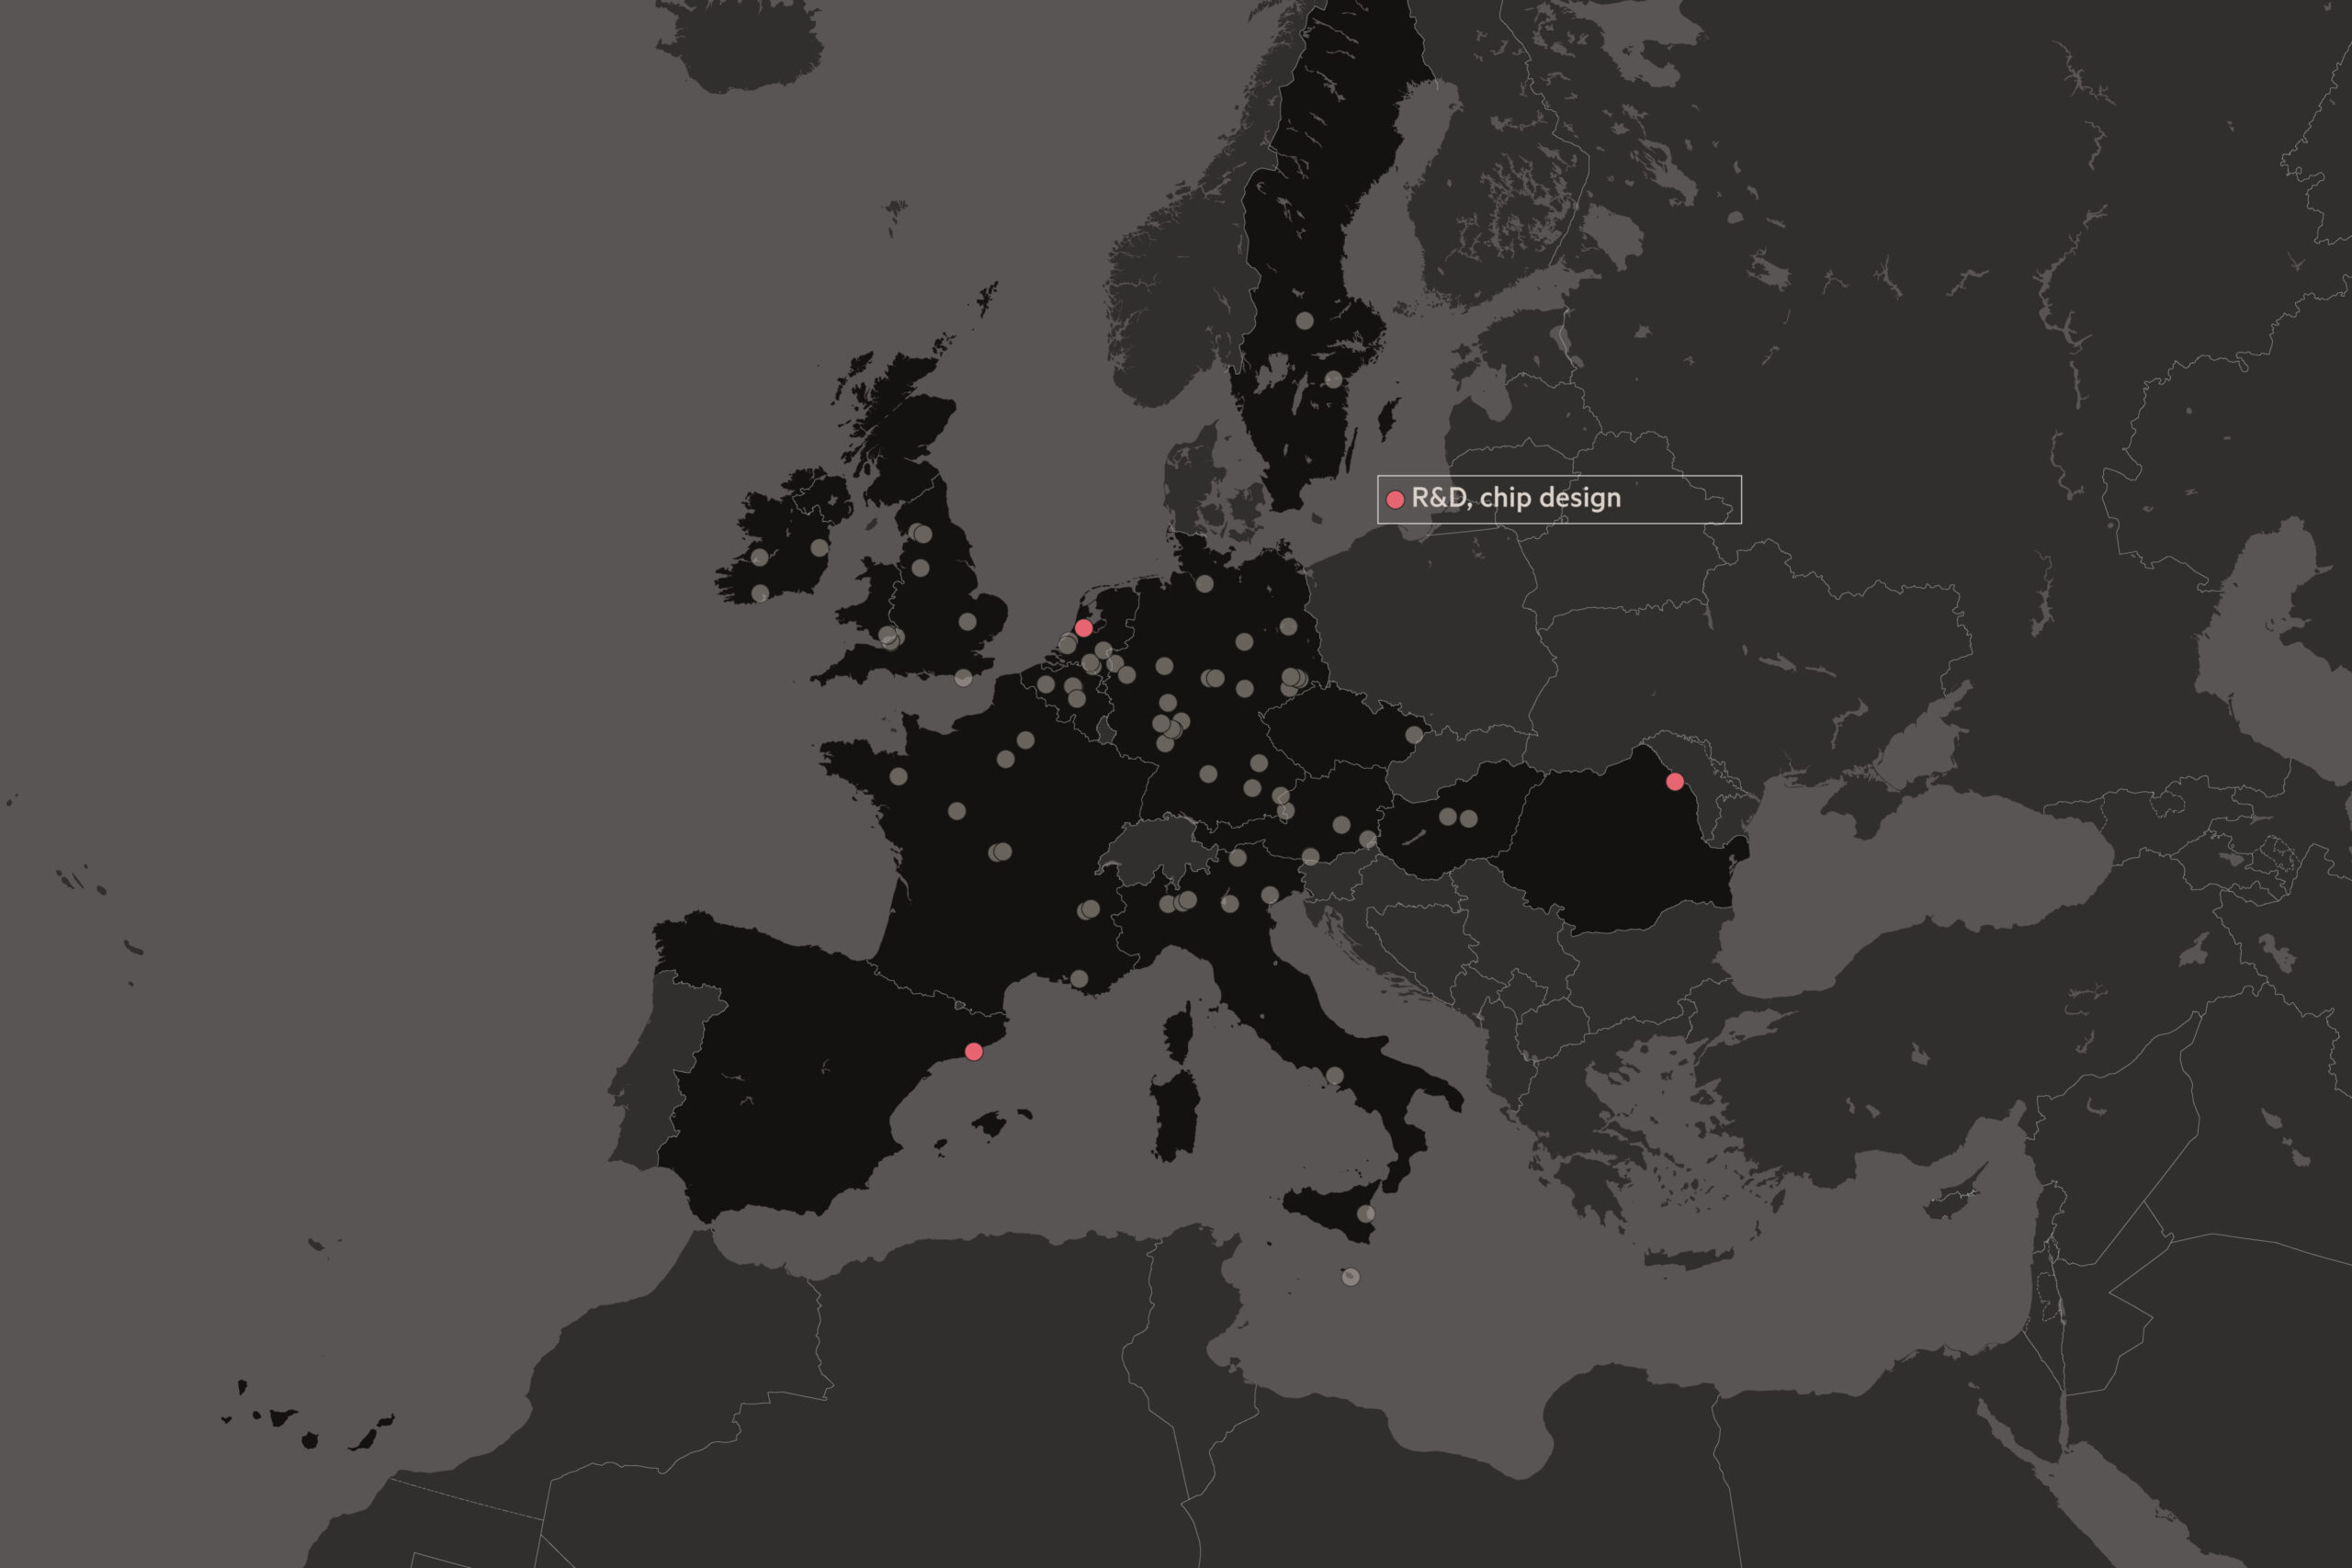 A map showing just three R&D chip design locations in Europe